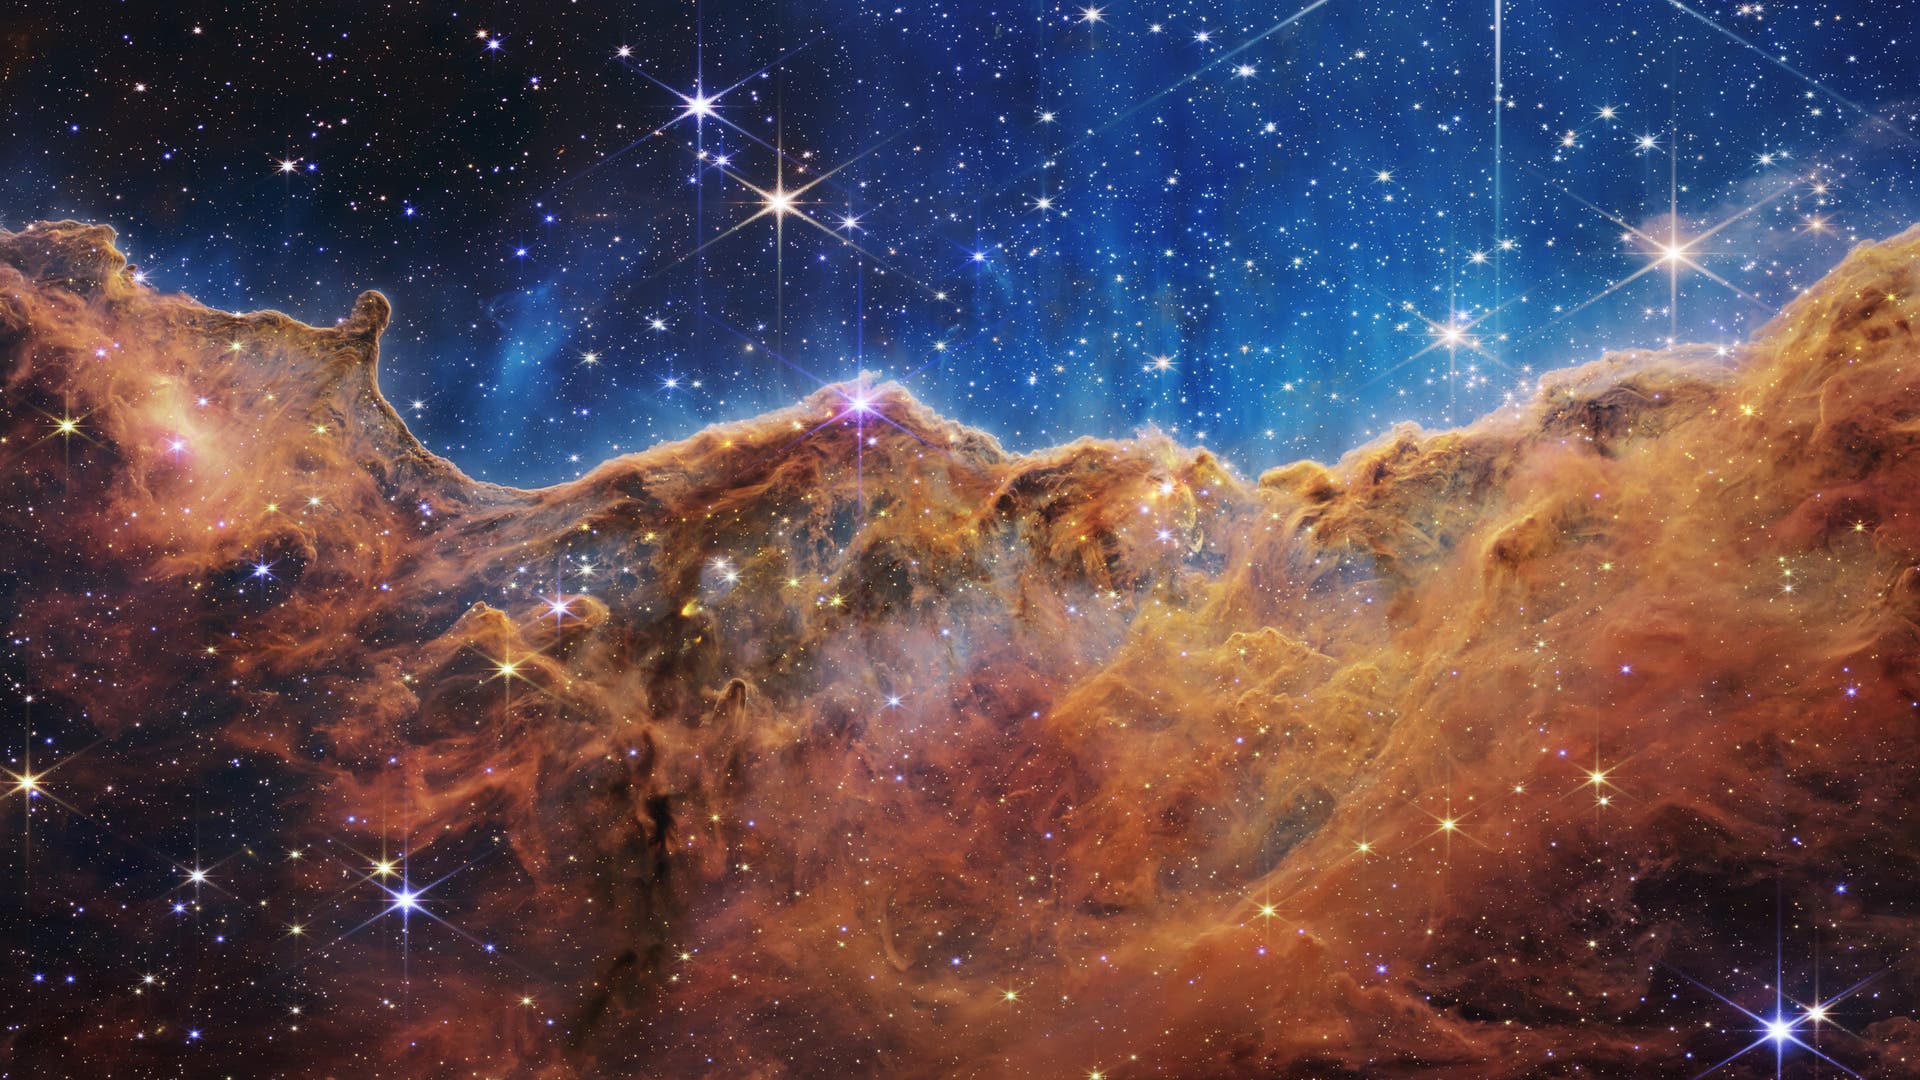 James Webb Space Telescope: A rocky view of dust and stars